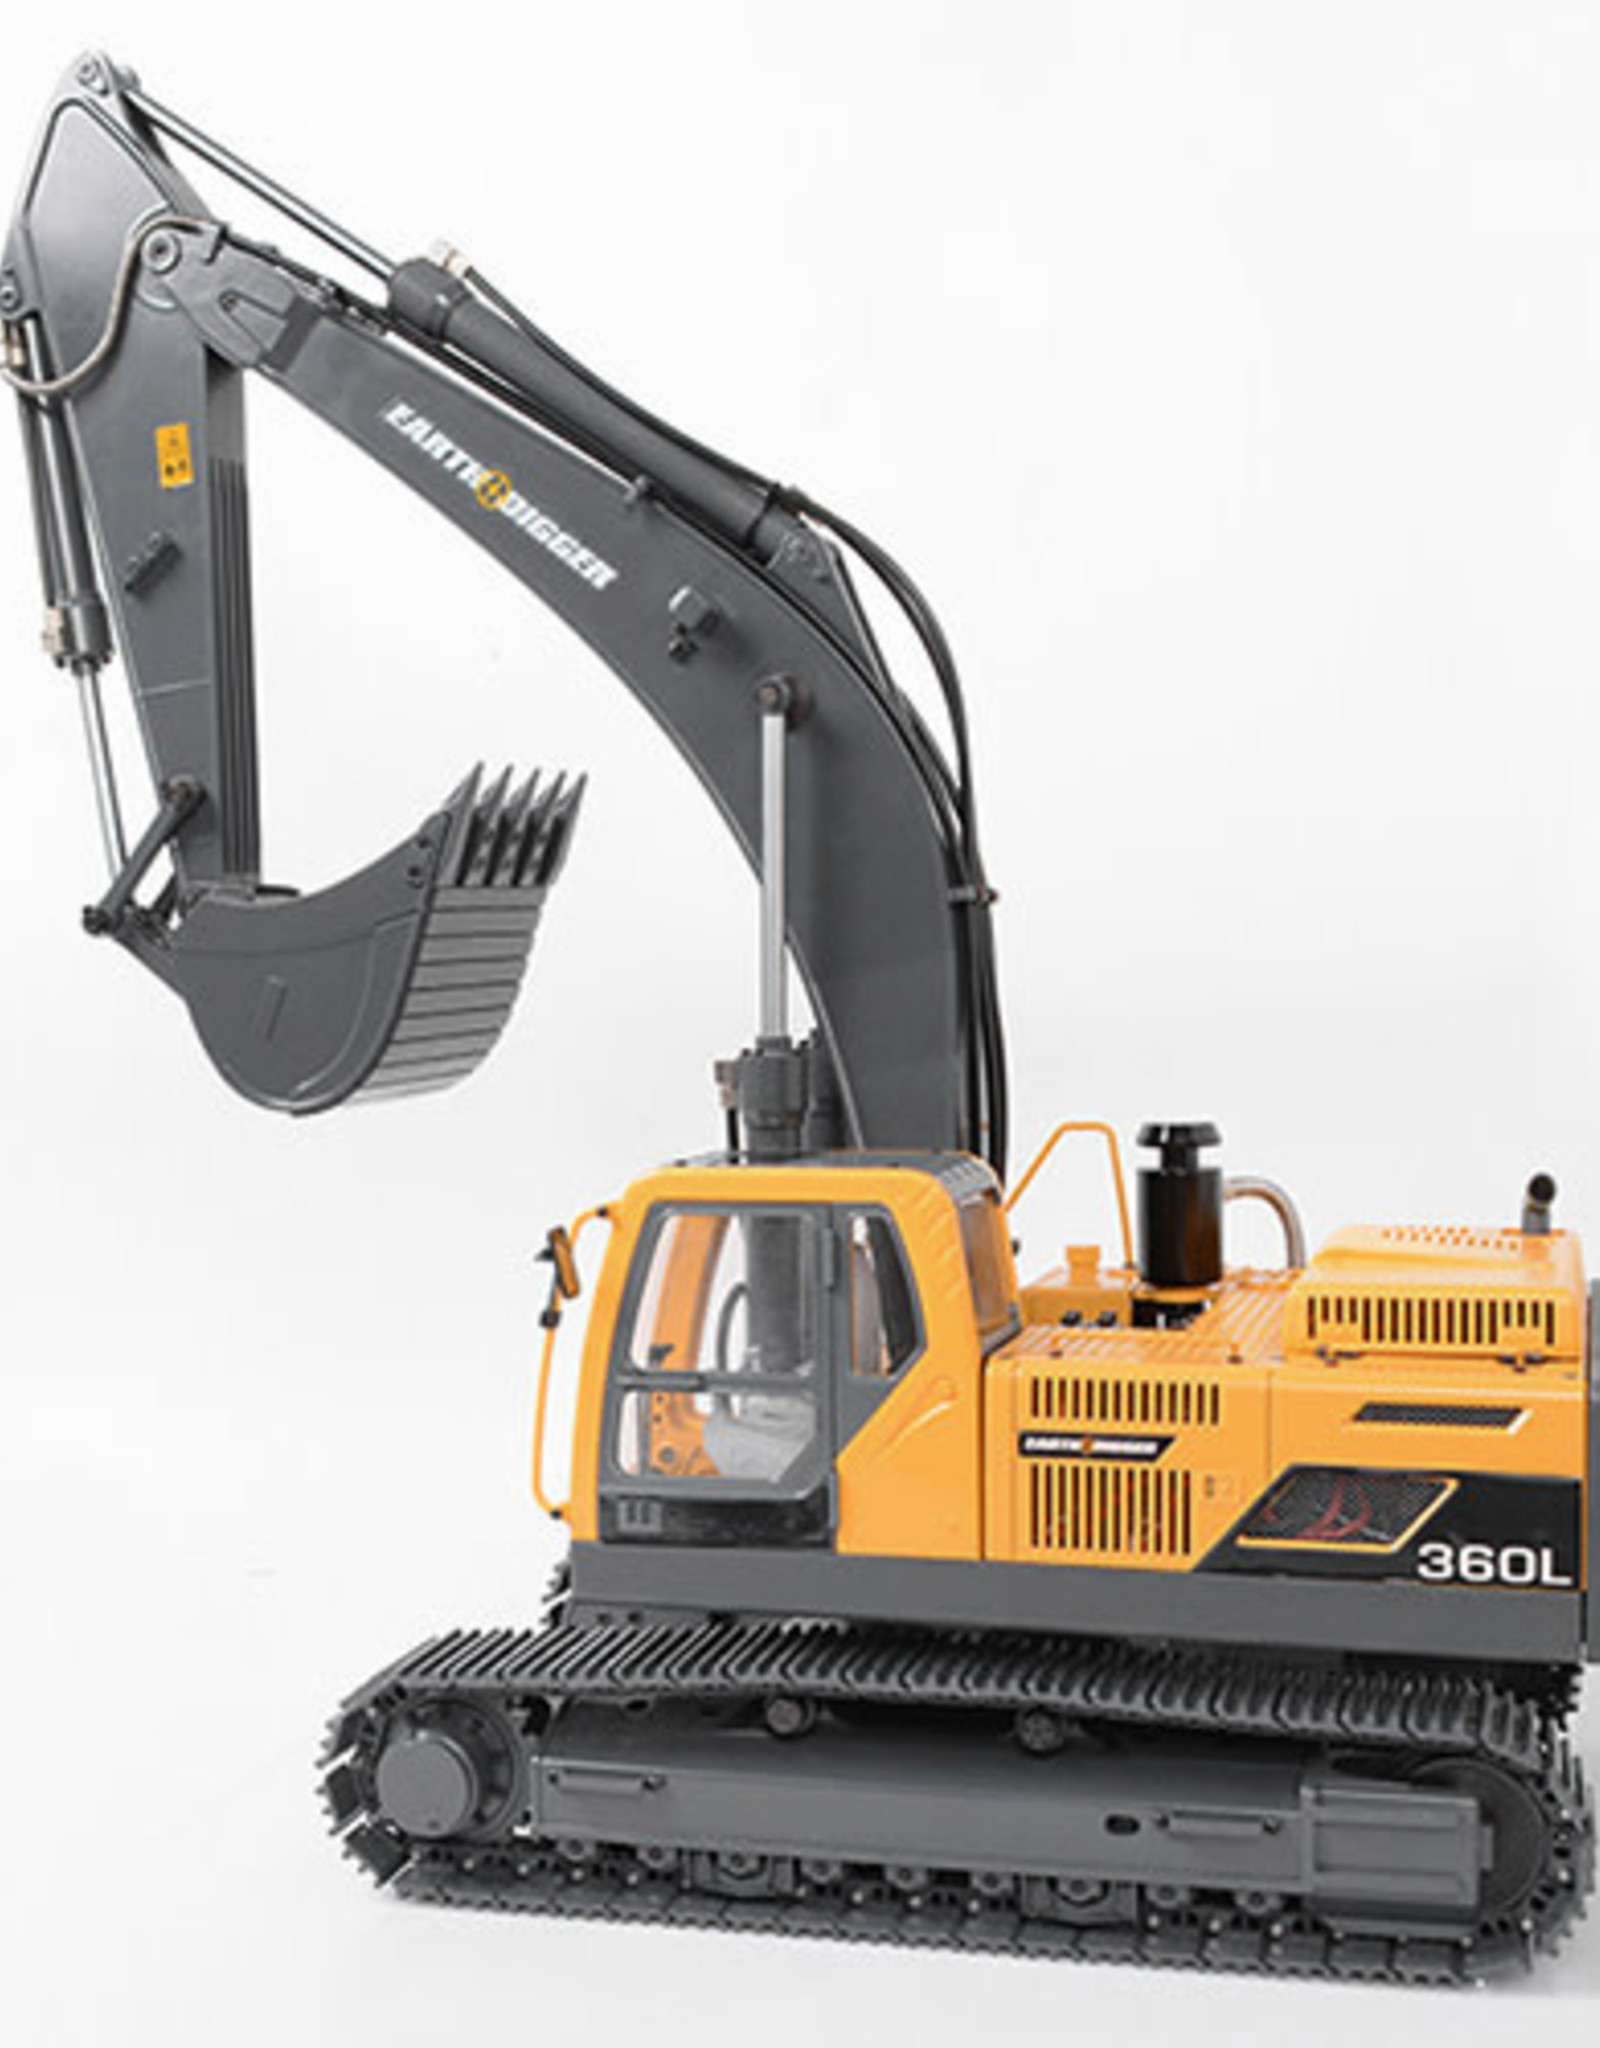 RC4WD RC4WD-VV-JD00016 1/14 Scale RTR Earth Digger 360L Hydraulic Excavator (Yellow)